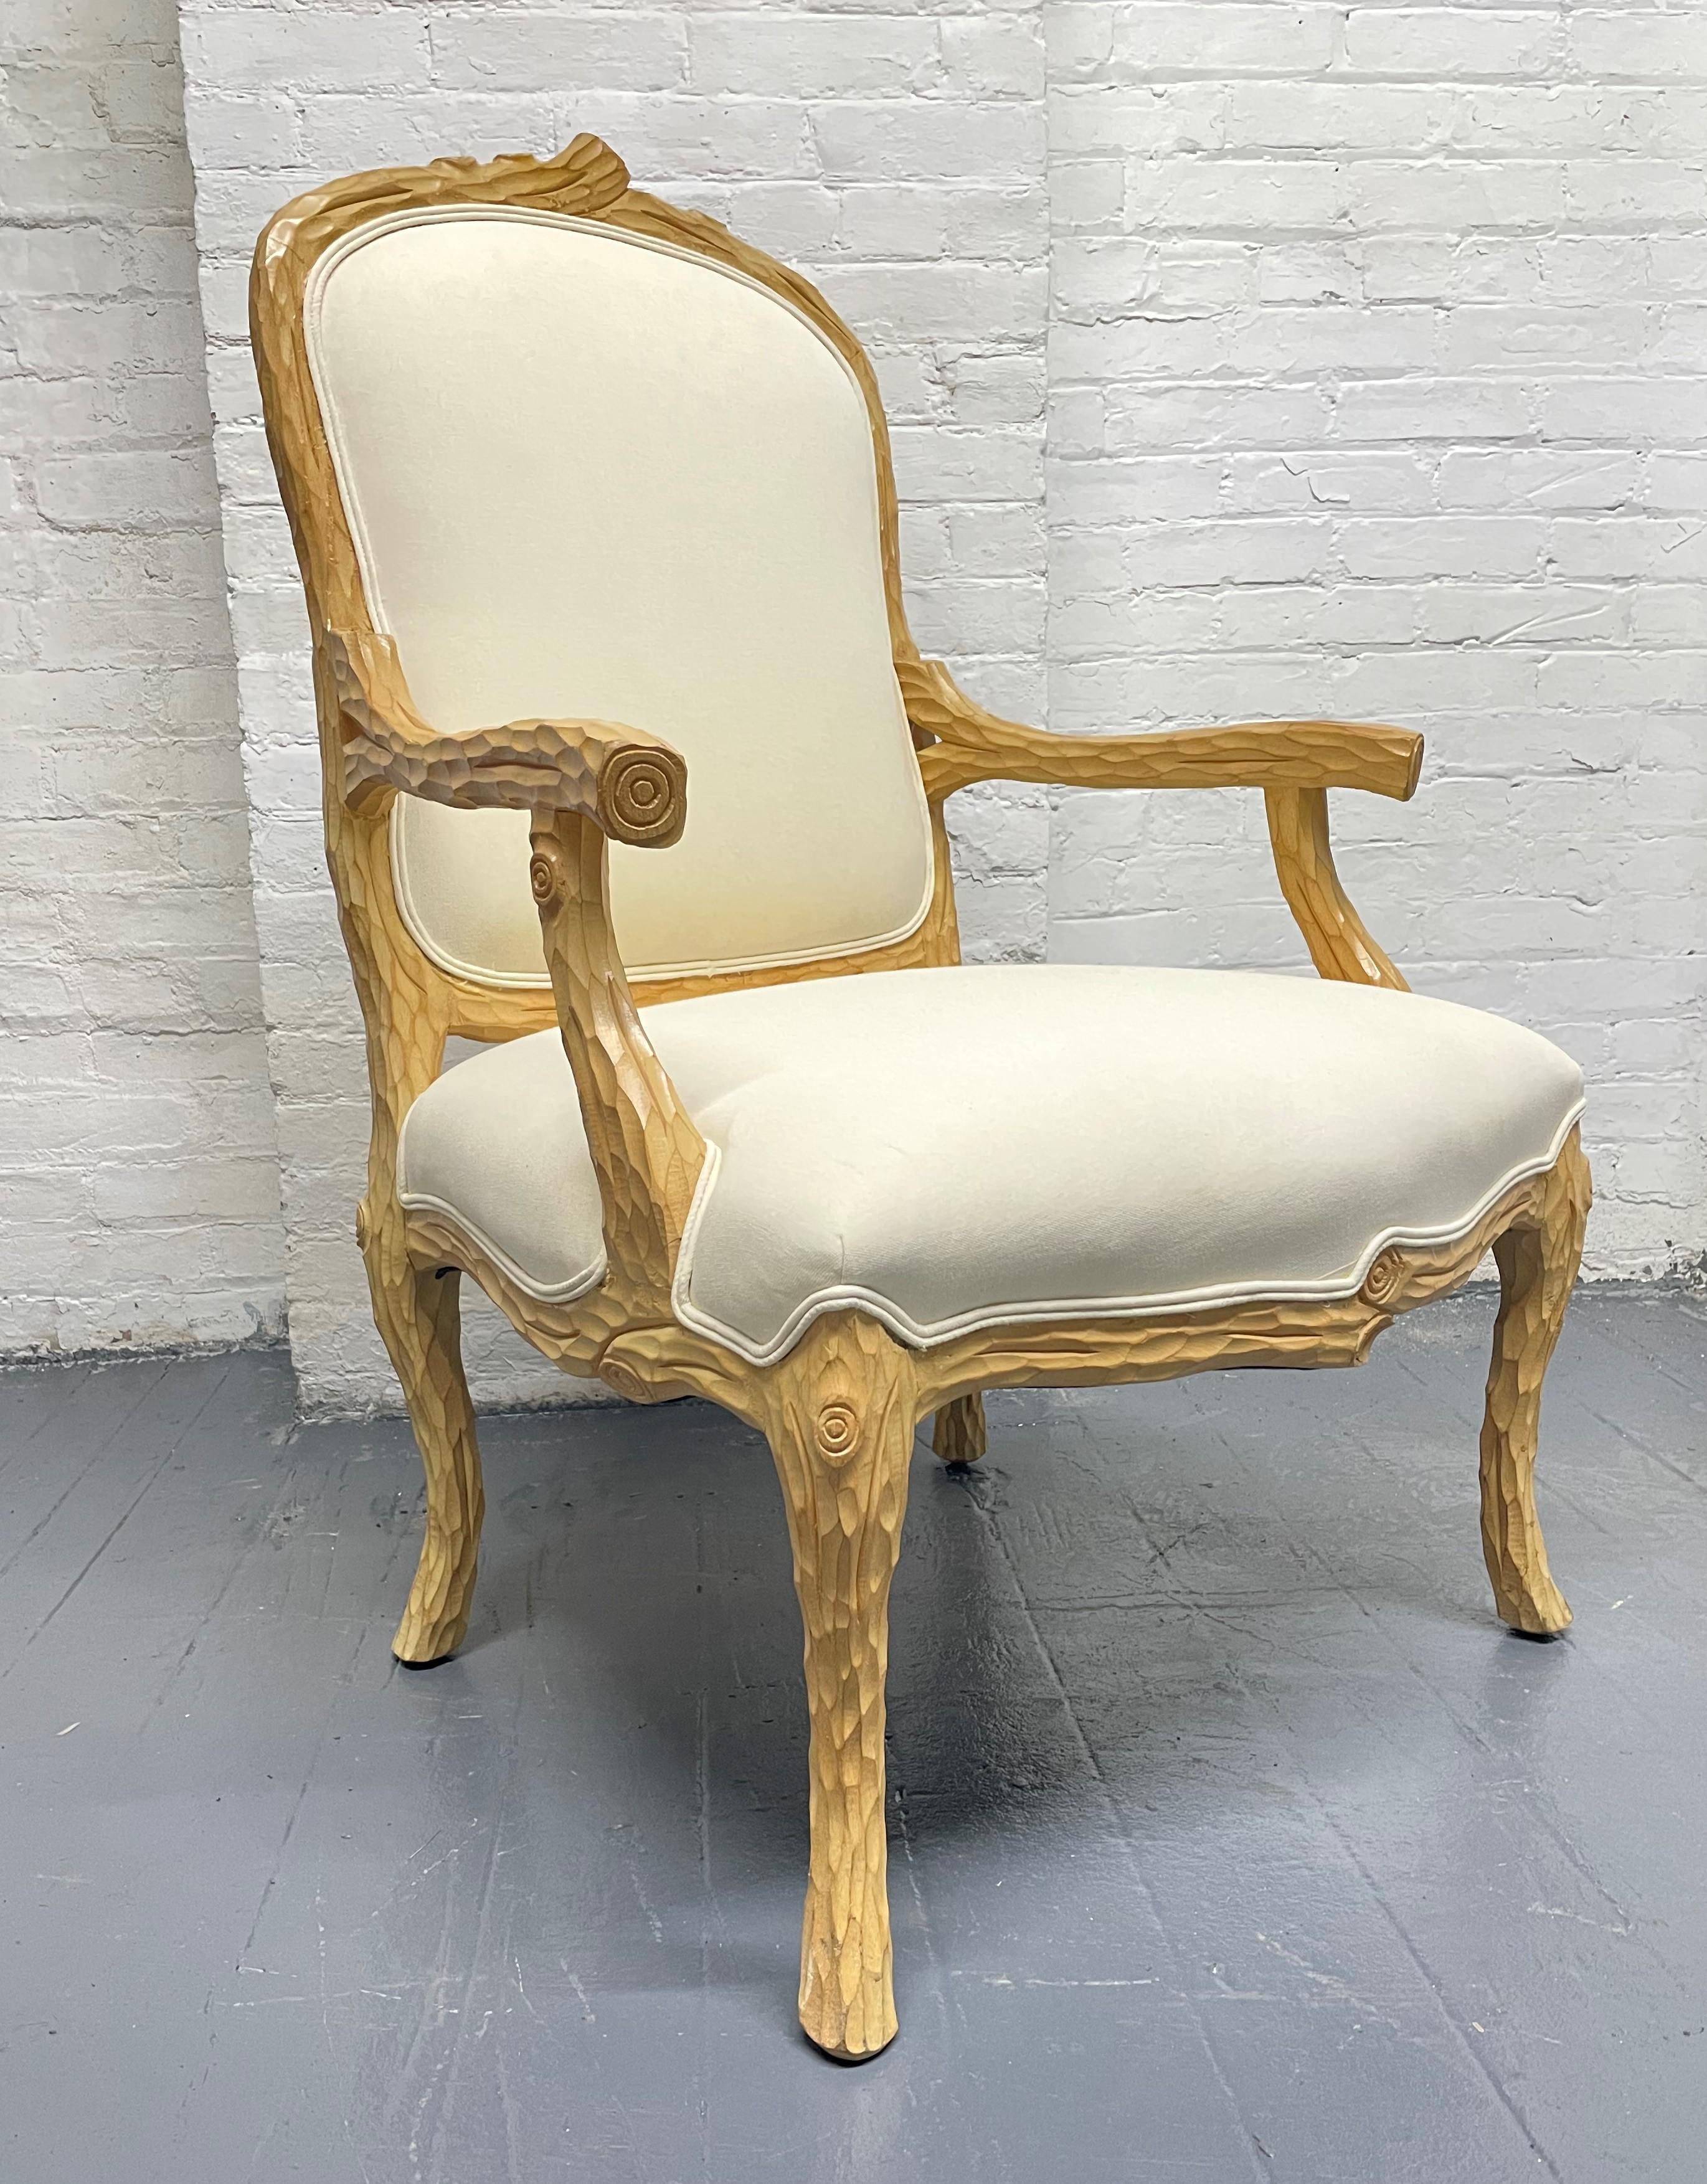 Carved French country armchair in linen-blend upholstery.